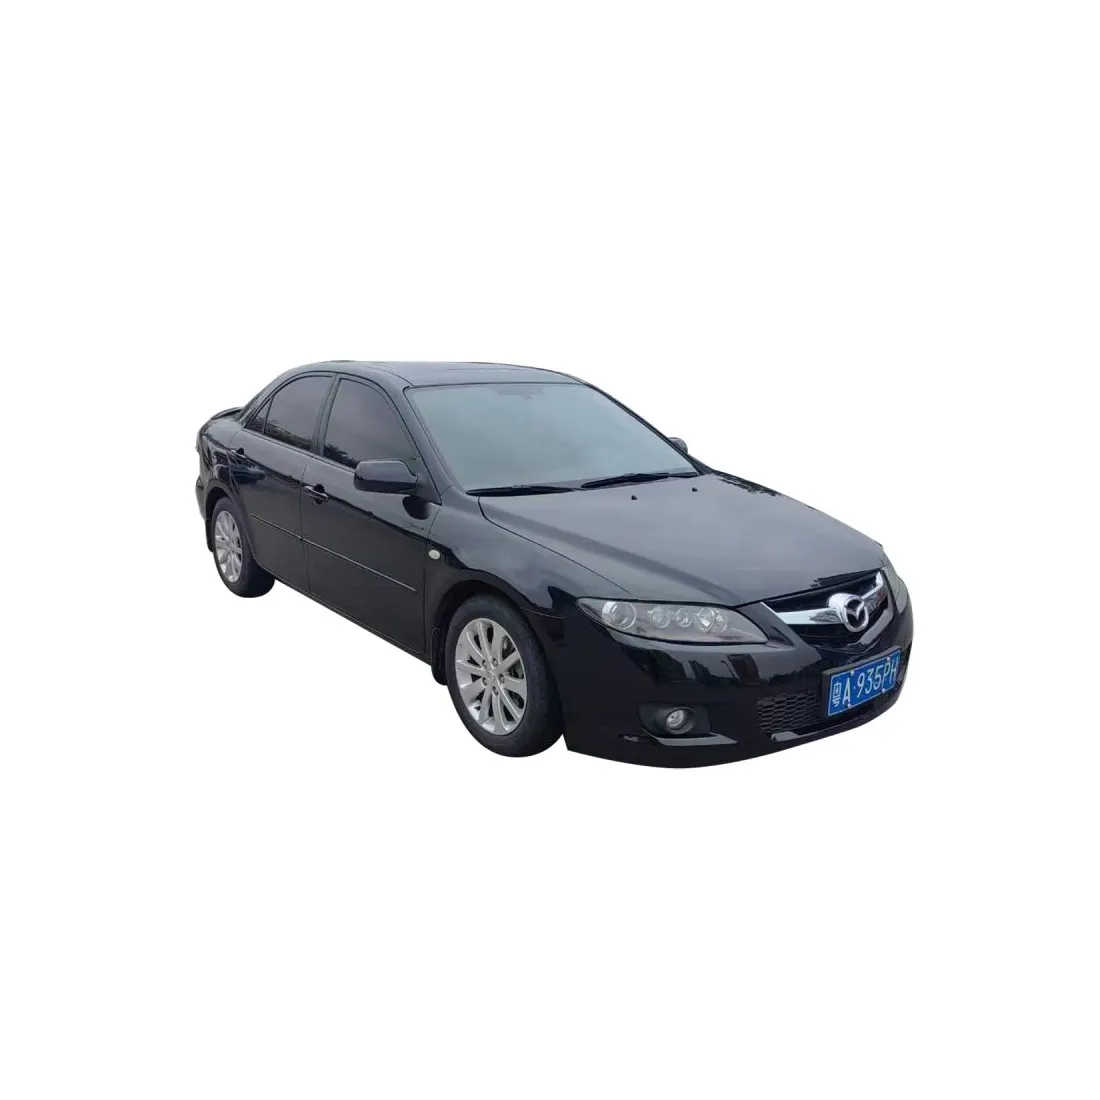 Best price in Stock 5 days delivery 2007 Mazda6 2.6L automatic used car for sale,second hand suv vehicles cheap cars